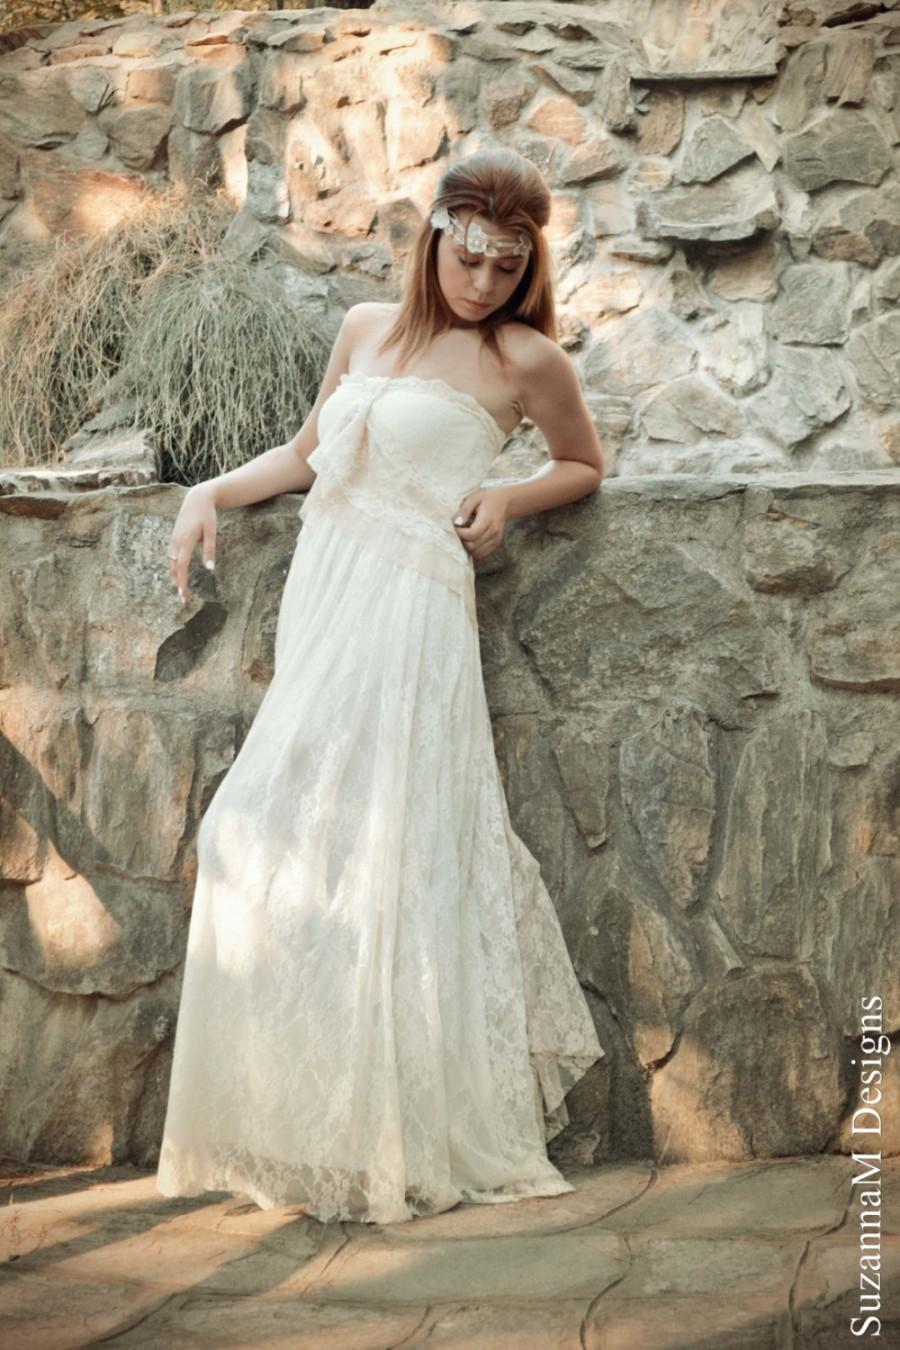 Mariage - Ivory Lace Bohemian Wedding Dress Long Strappless Bridal Wedding Retro Gown with Cream Lace Details - Handmade by SuzannaM Designs